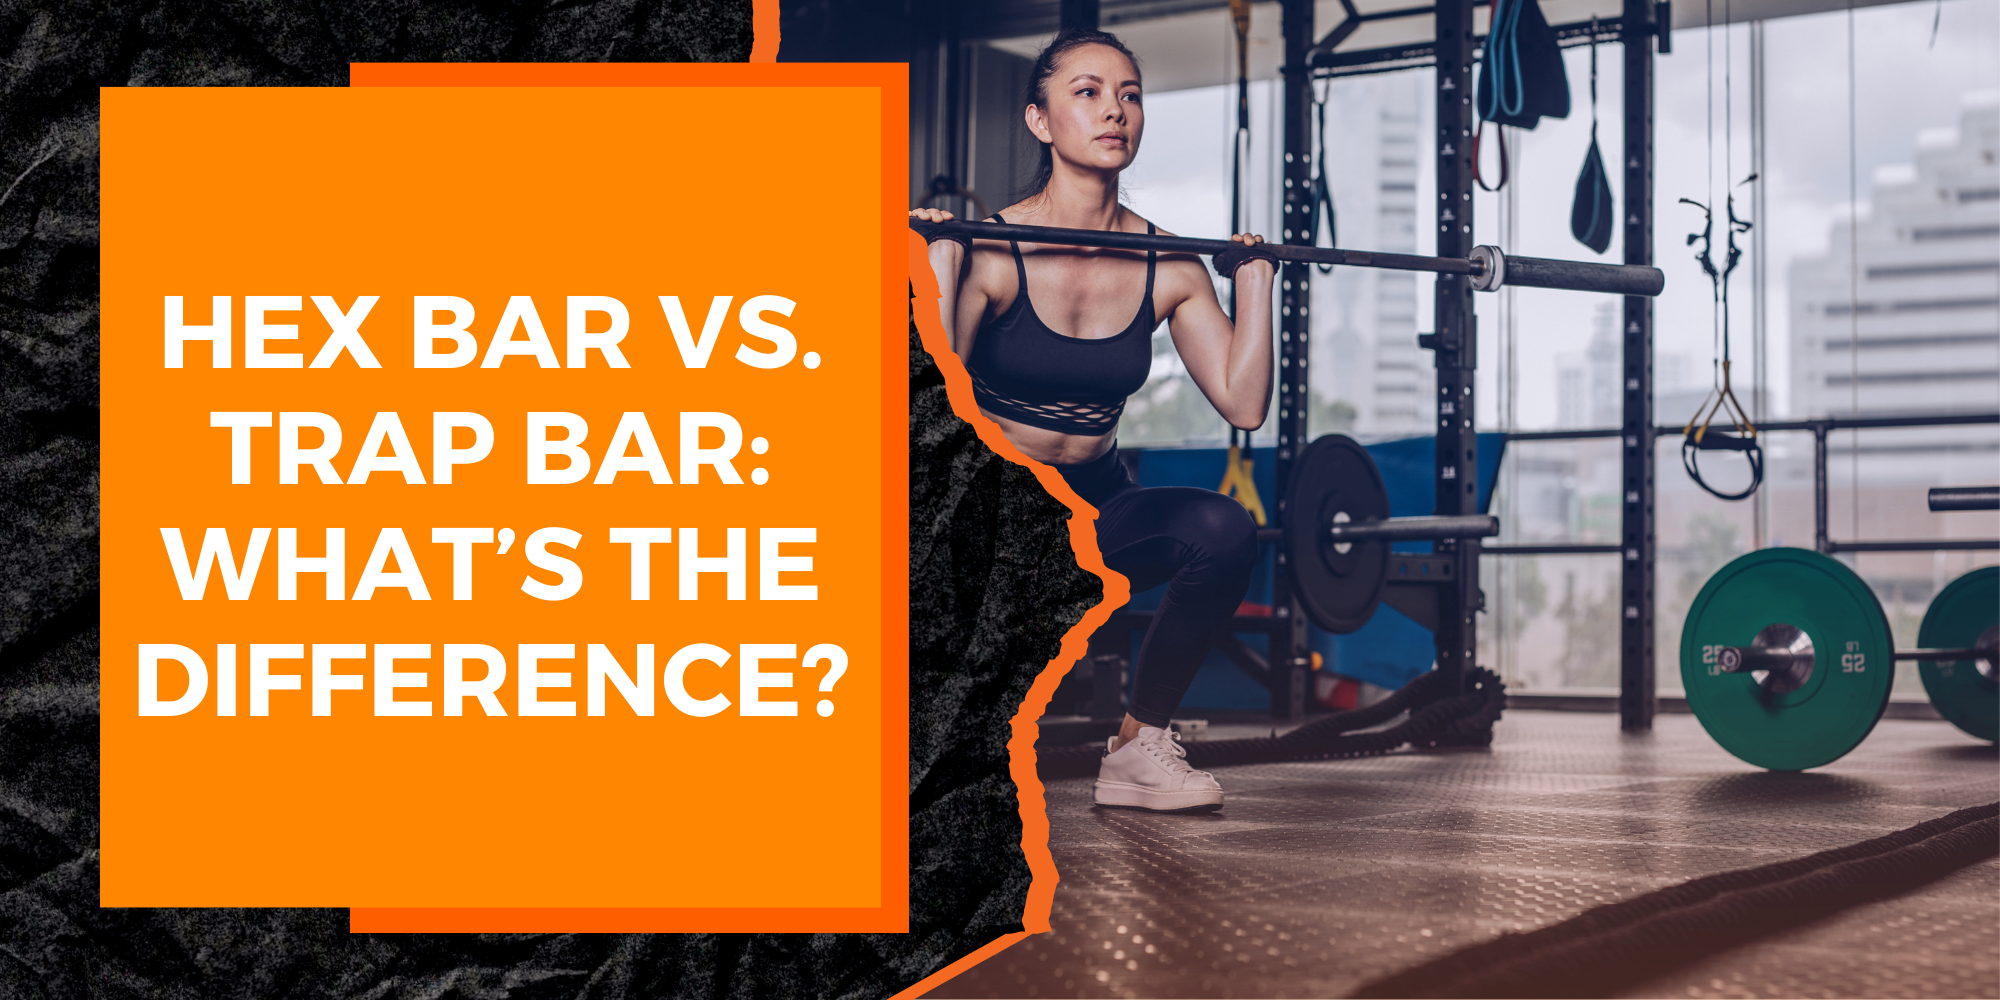 Hex Bar vs. Trap Bar: What’s the Difference?